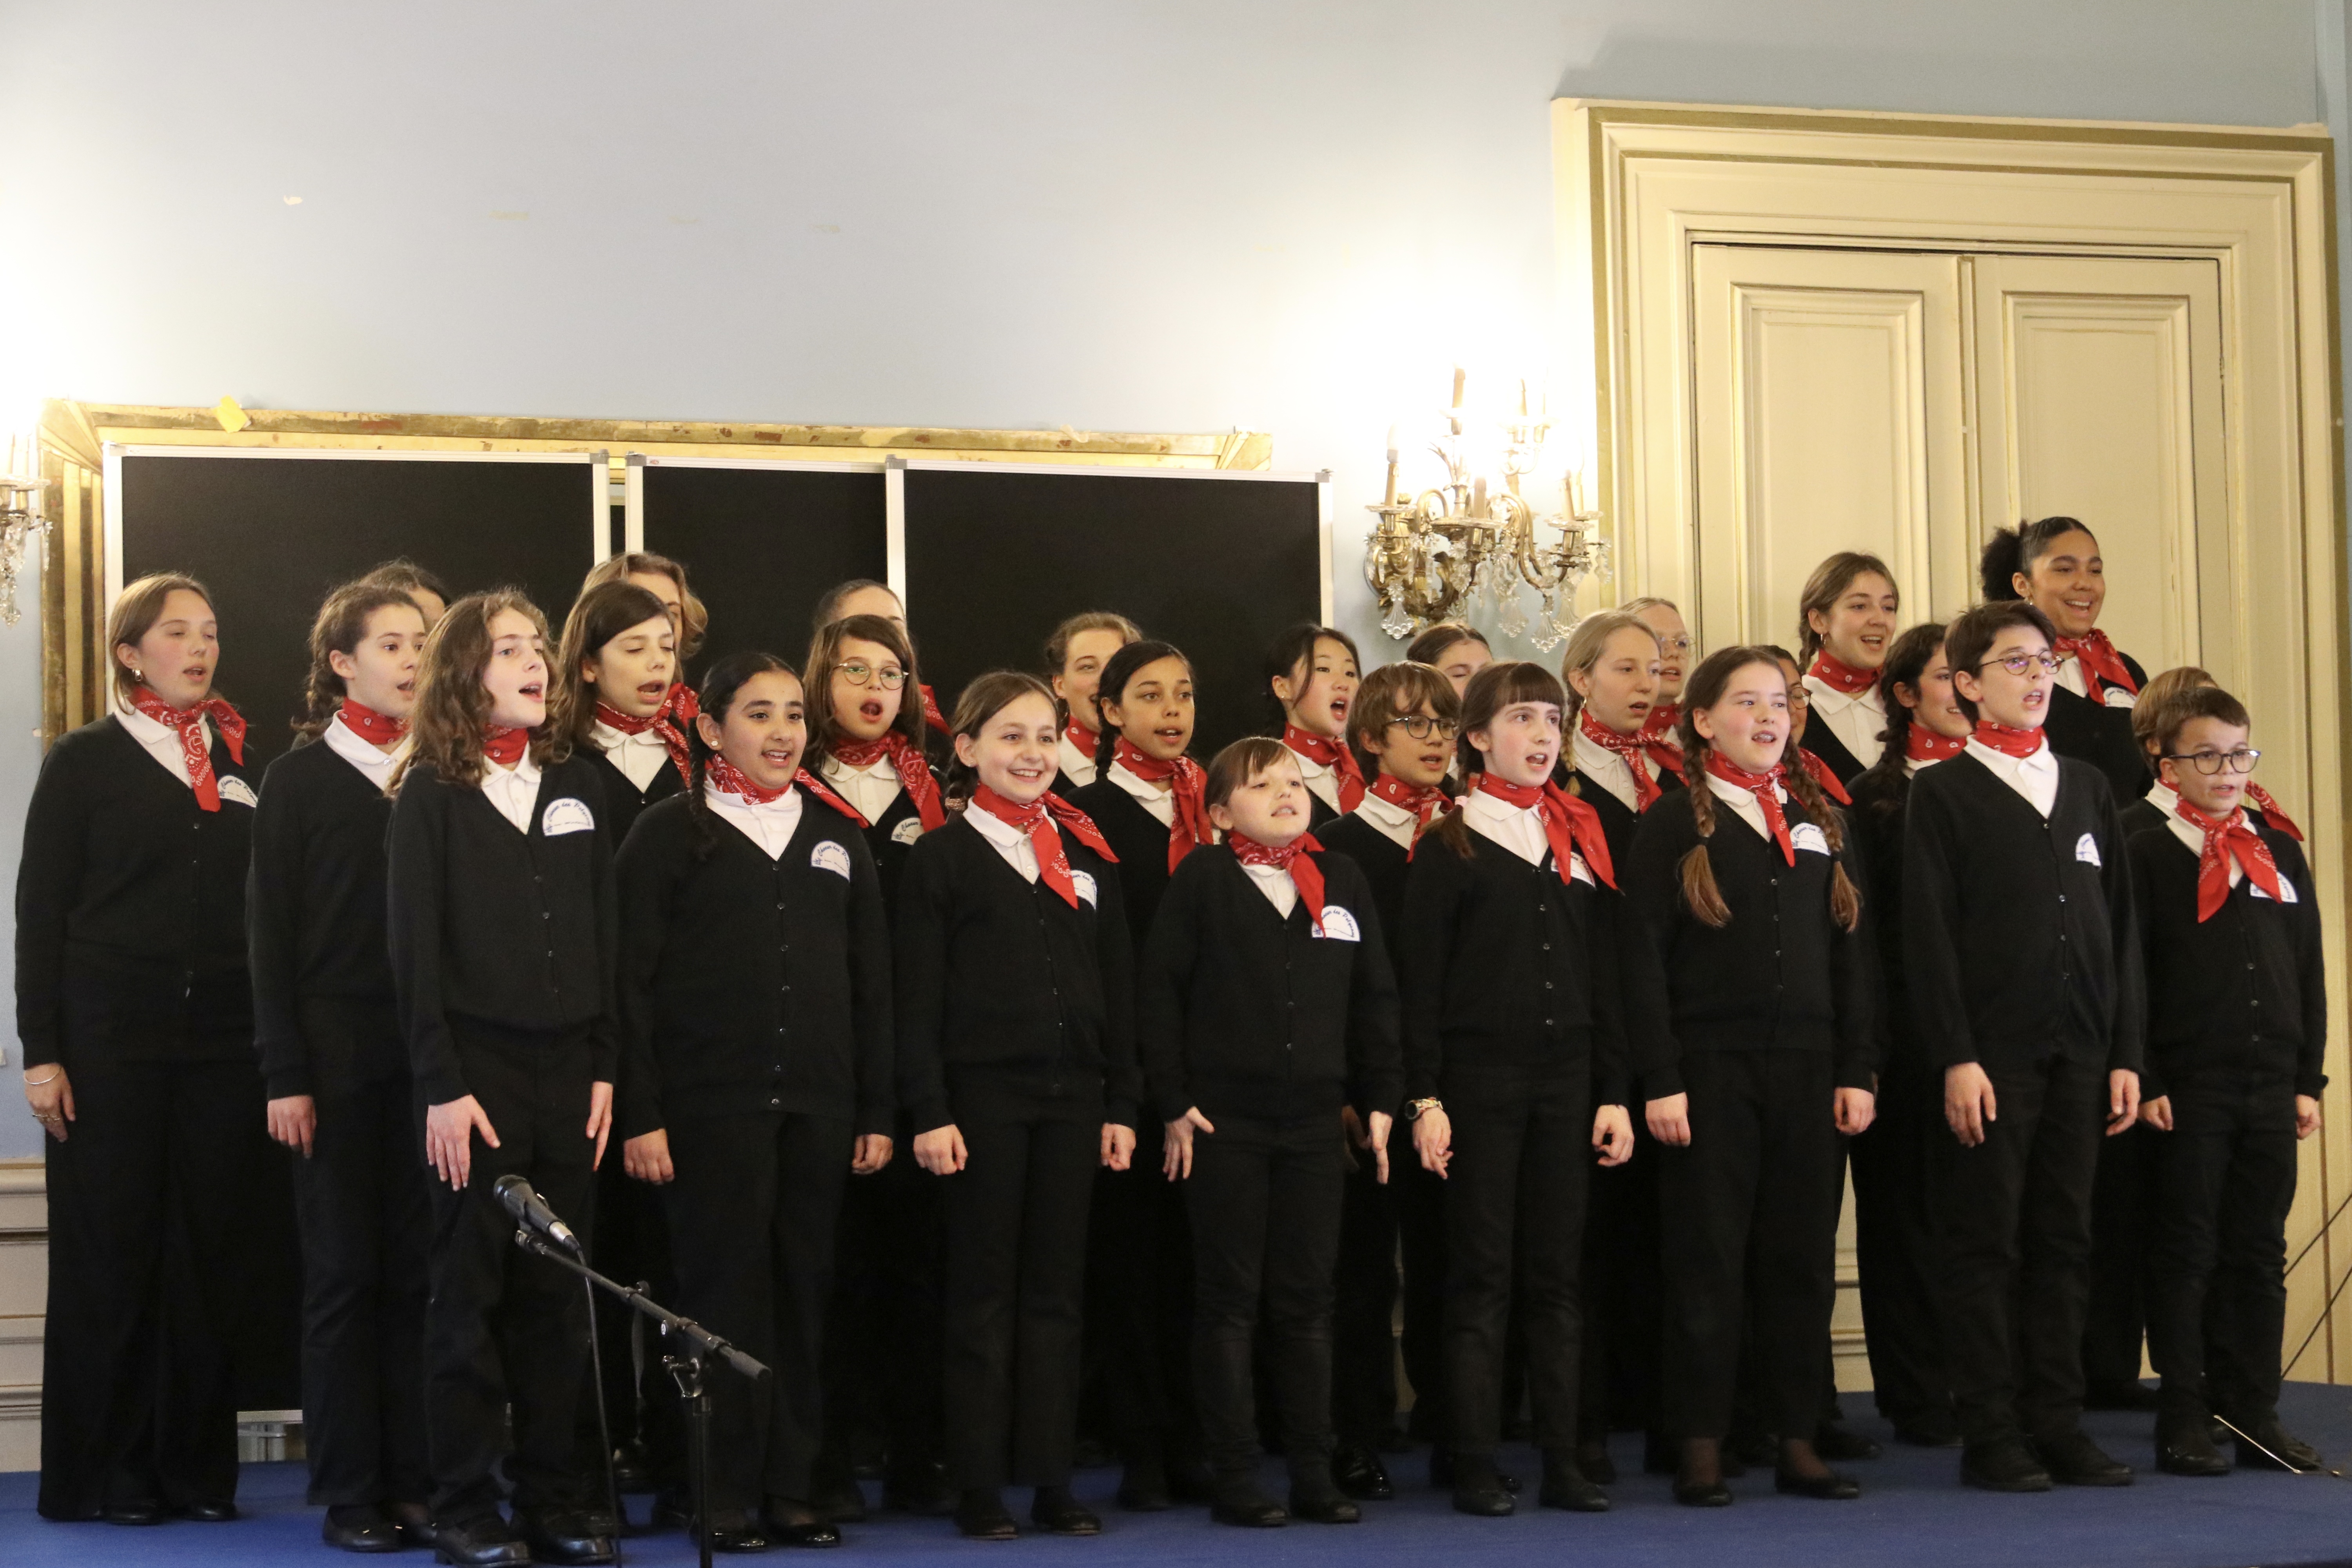 Members of the Polysons Children's Choir perform during a concert in Paris, France. /Photo provided to CGTN